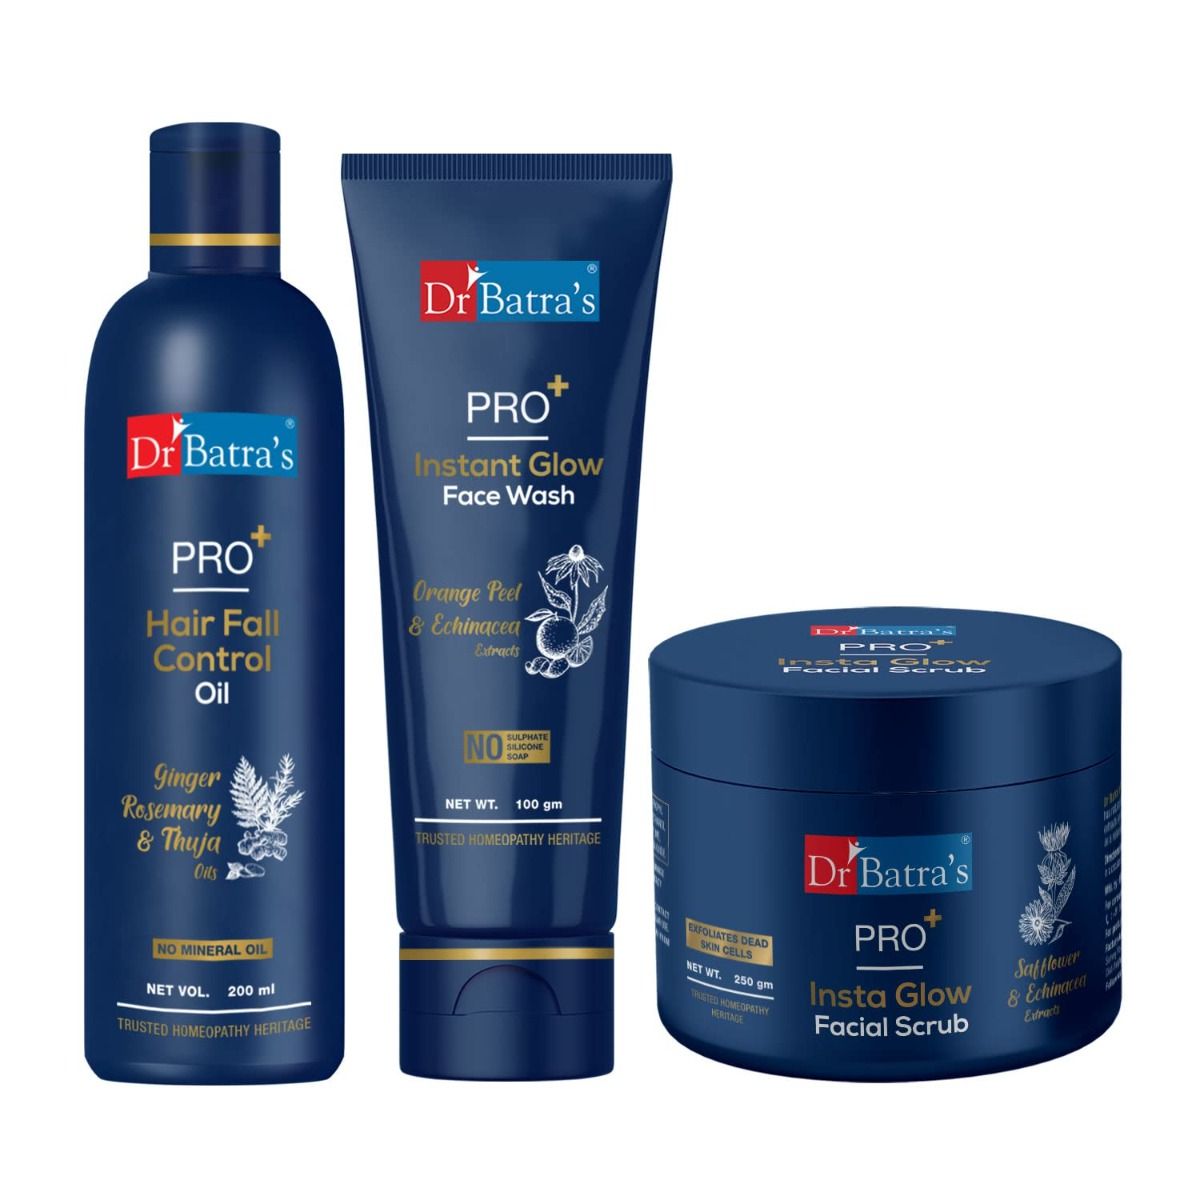     			Dr Batra's Pro+ Hair Fall Control Oil, Pro+Instant Glow Face Wash And Pro+ Insta Glow Facial Scrub